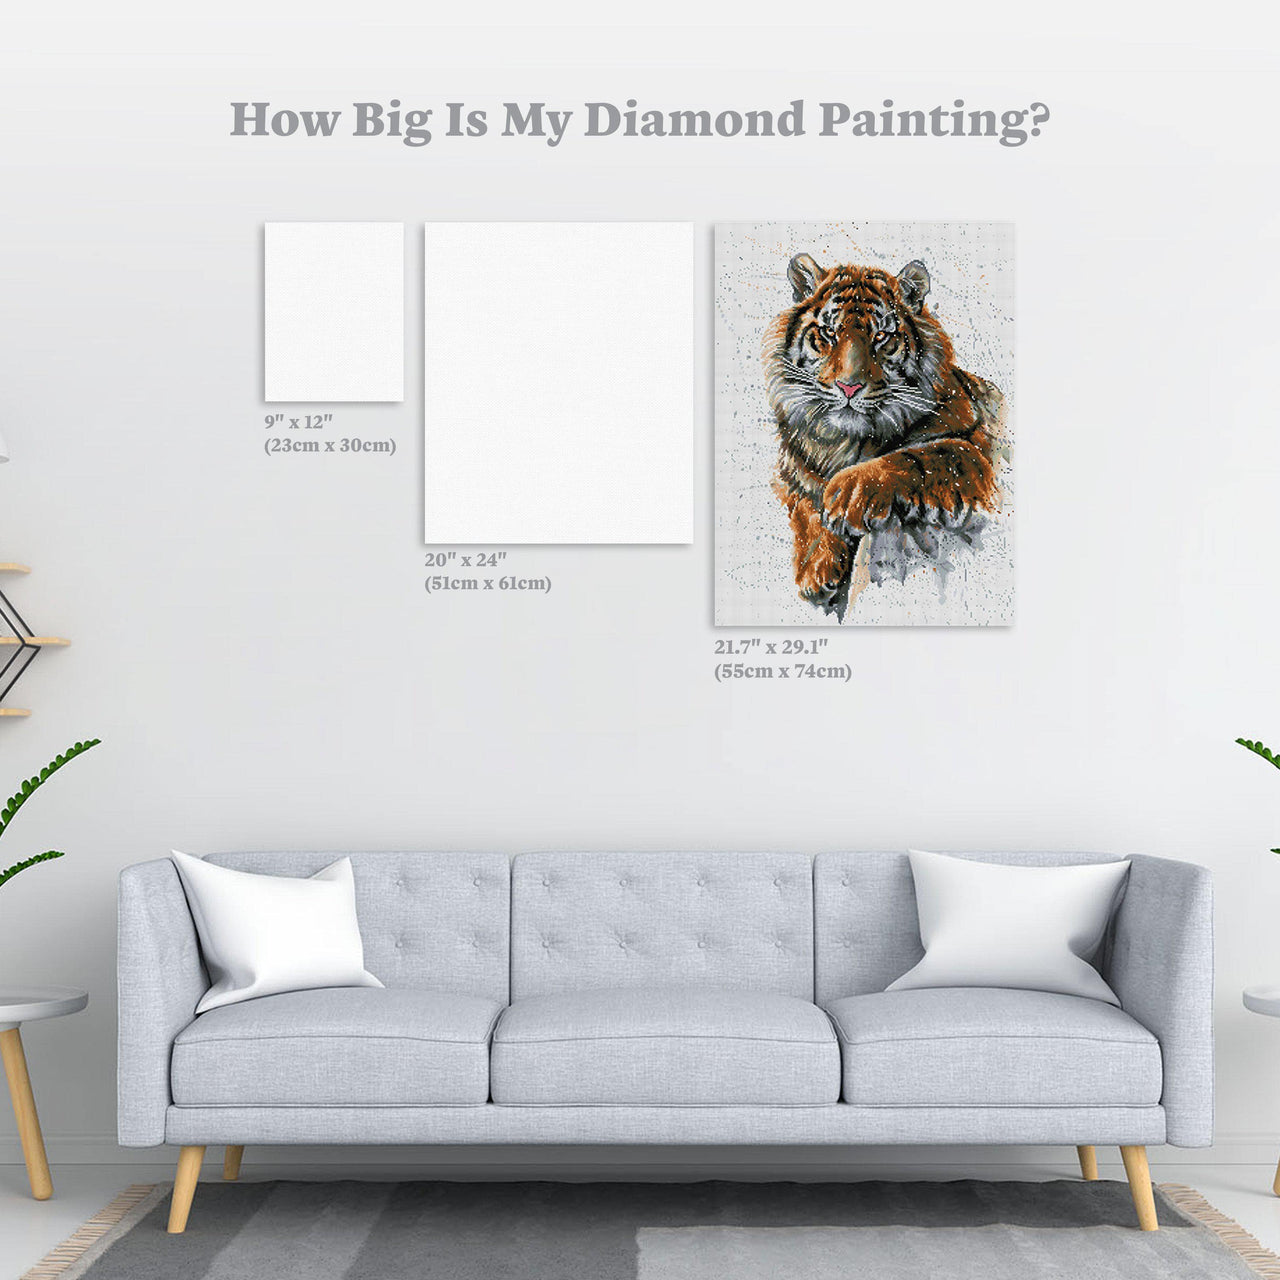 Diamond Painting Tiger Watercolor 21.7" x 29.1″ (55cm x 74cm) / Square With 36 Colors Including 1 AB